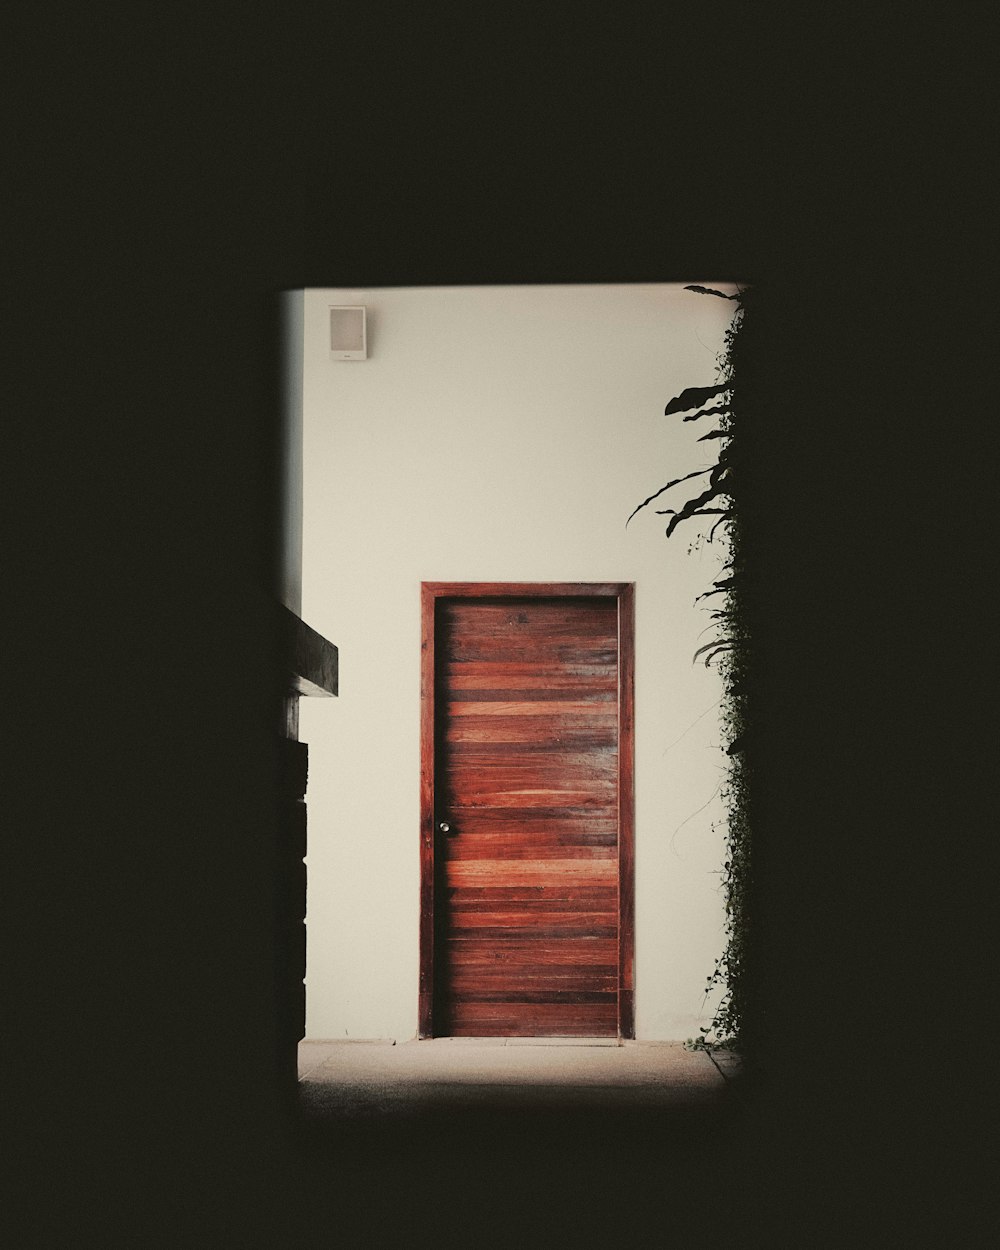 brown wooden door on white concrete wall